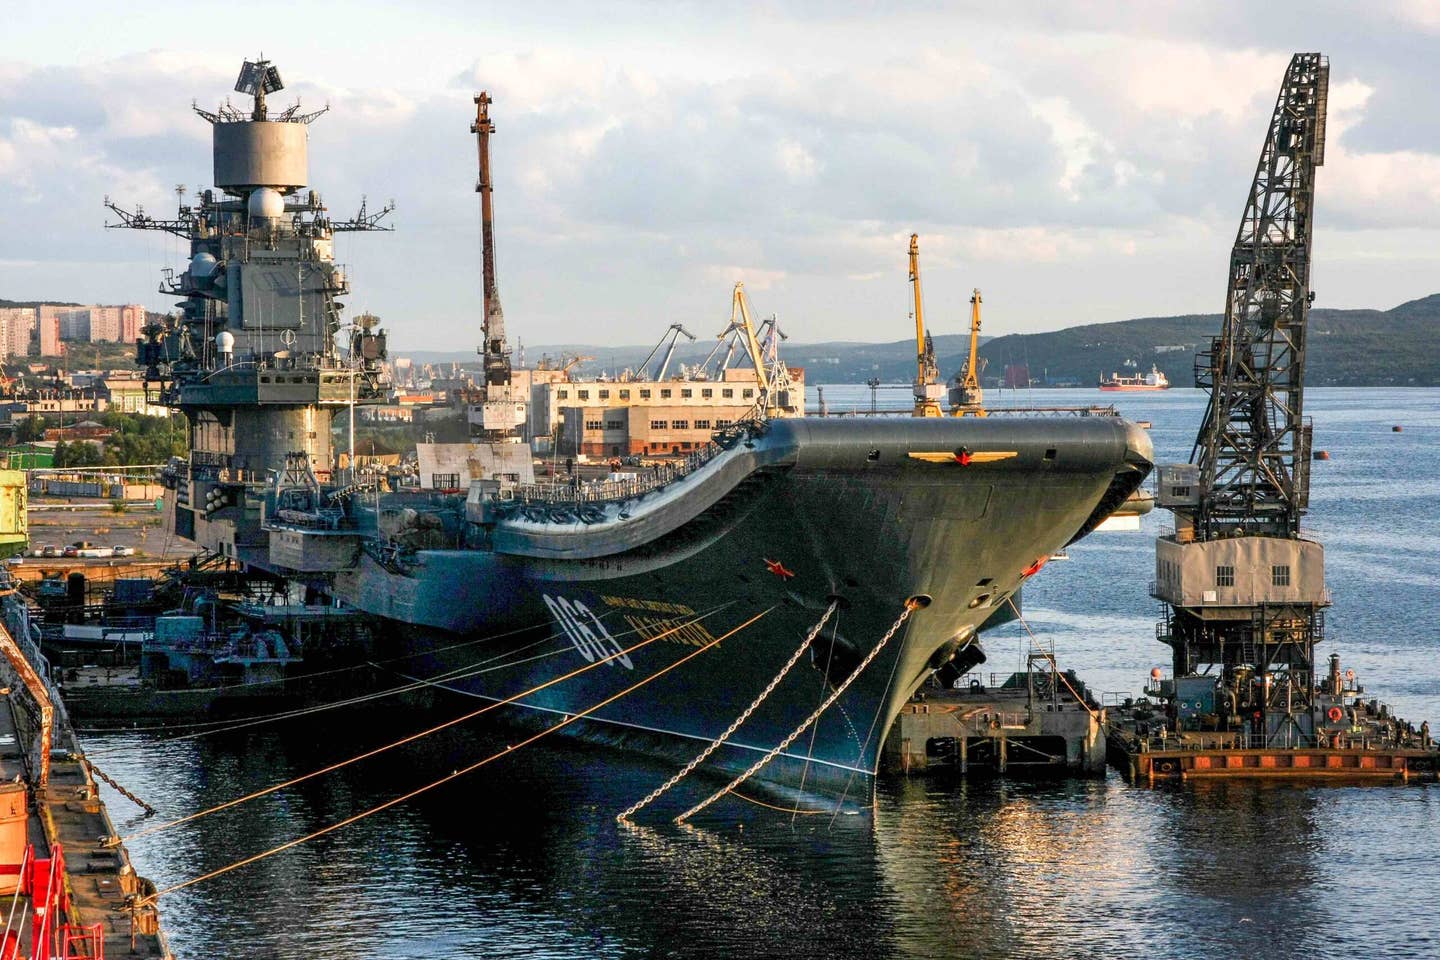 A picture taken on August 19, 2009, shows Russia's aircraft carrier Admiral Kuznetsov in Murmansk. <em>Photo credit: VASILY MAXIMOV/AFP via Getty Images</em>